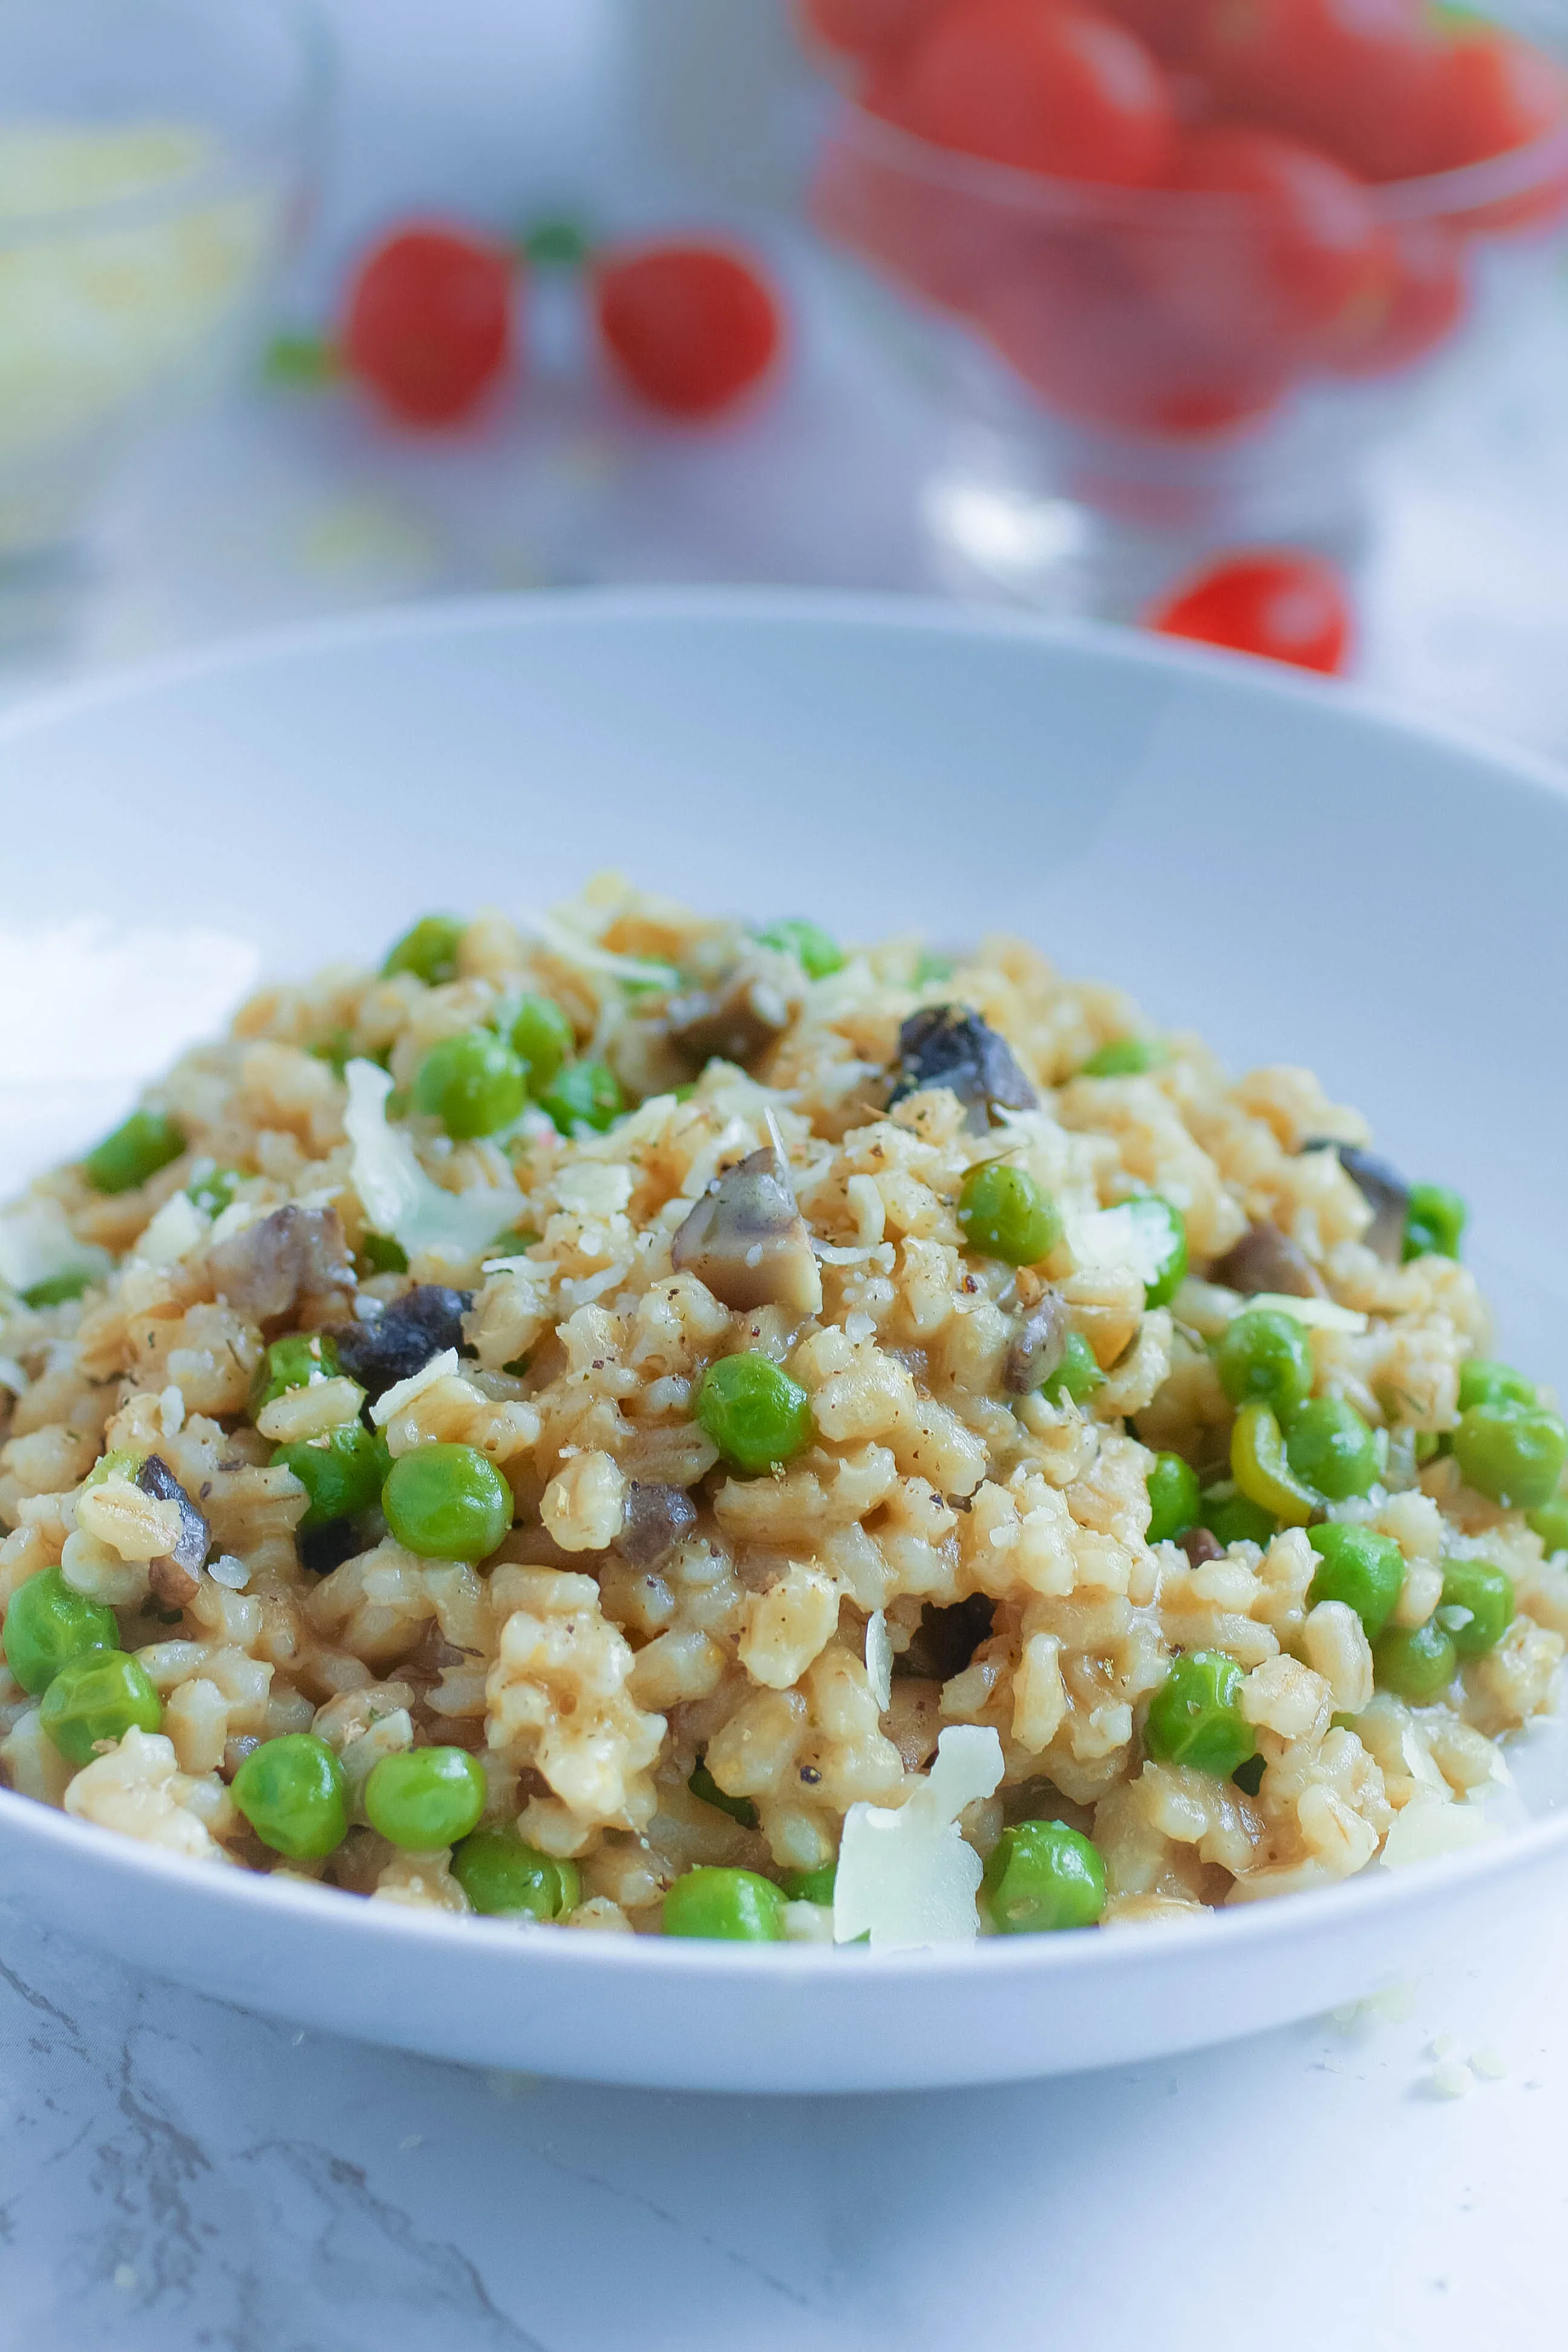 Barley Risotto with Mushrooms and Peas is a hearty meatless dish you'll love. Switch things up with Barley Risotto with Mushrooms and Peas.